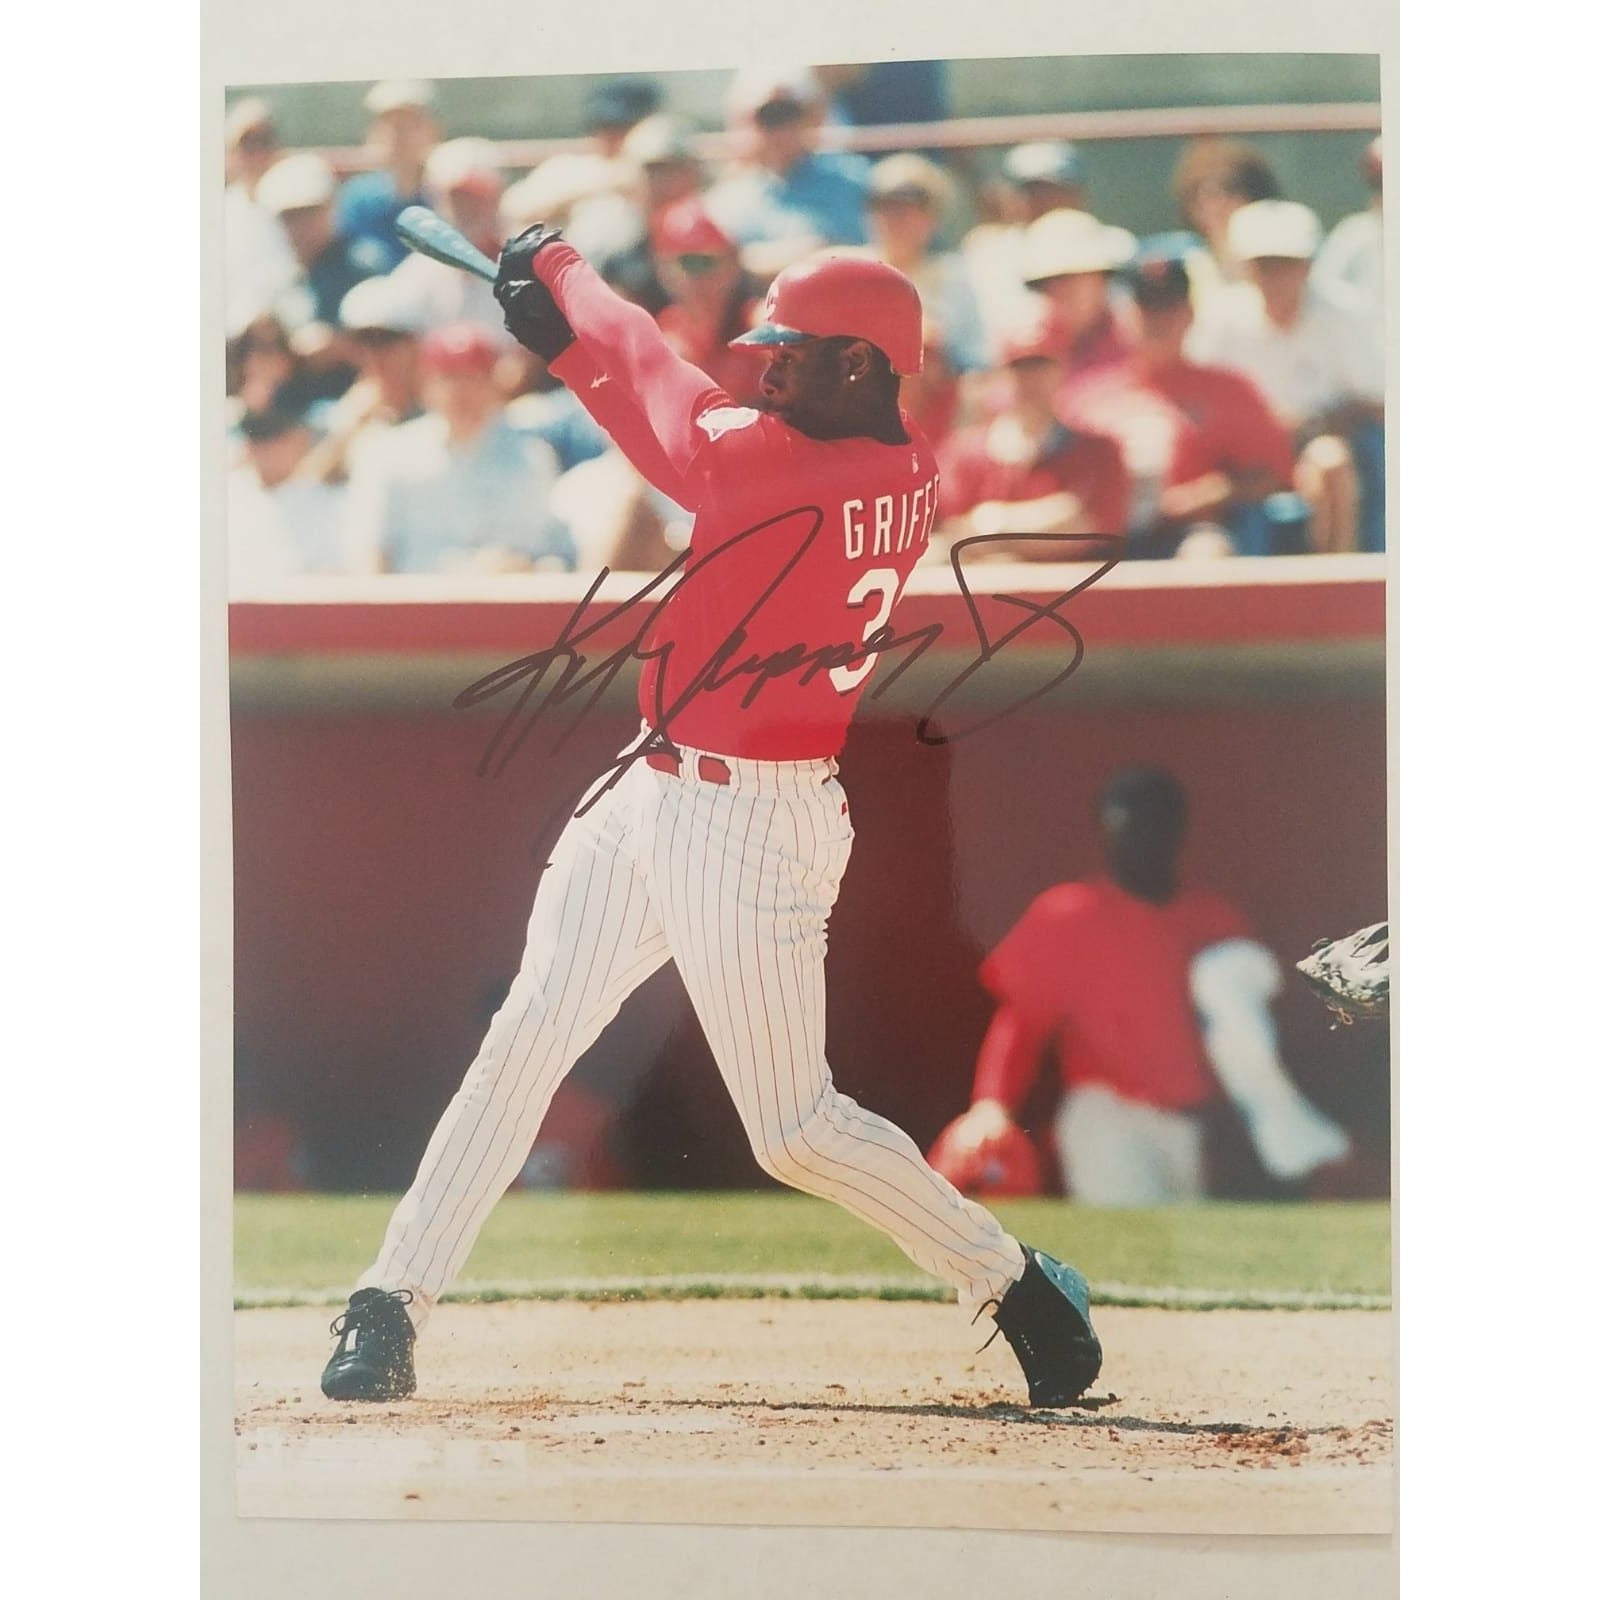 Ken Griffey Jr. Baseball Hall of Famer signed 8X10 photo with proof